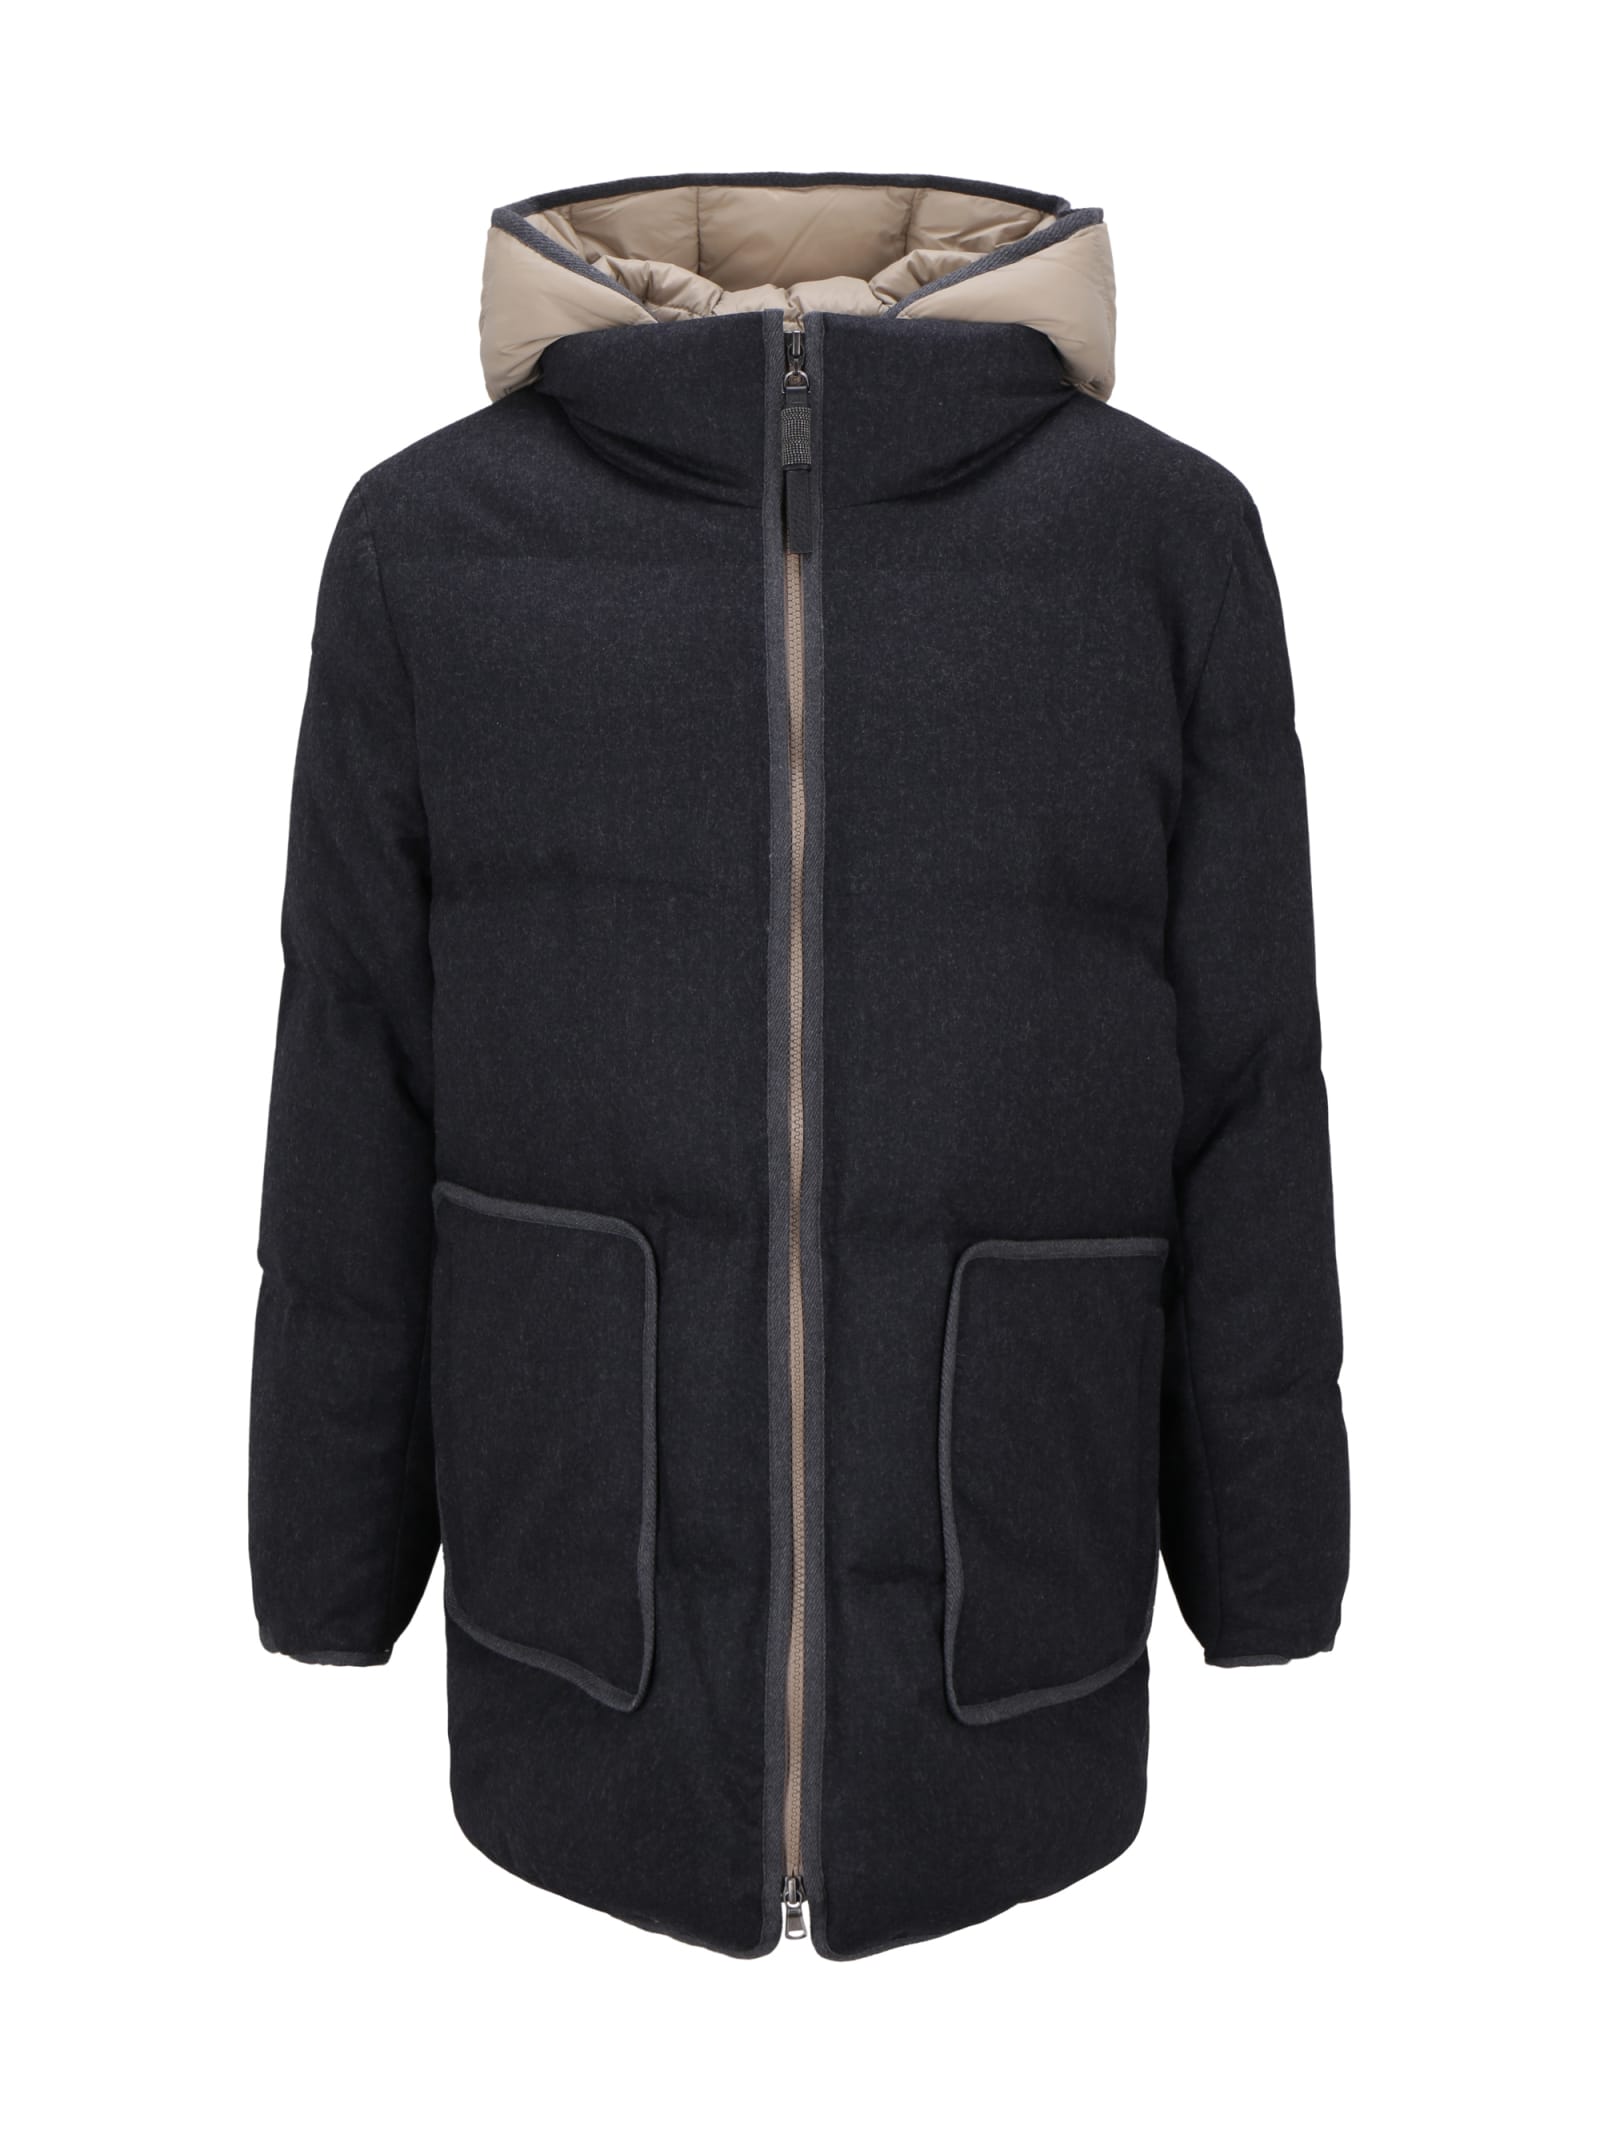 Long Down Jacket In Soft Wool Padded With Real Goose Down With Detachable Front With Hood.